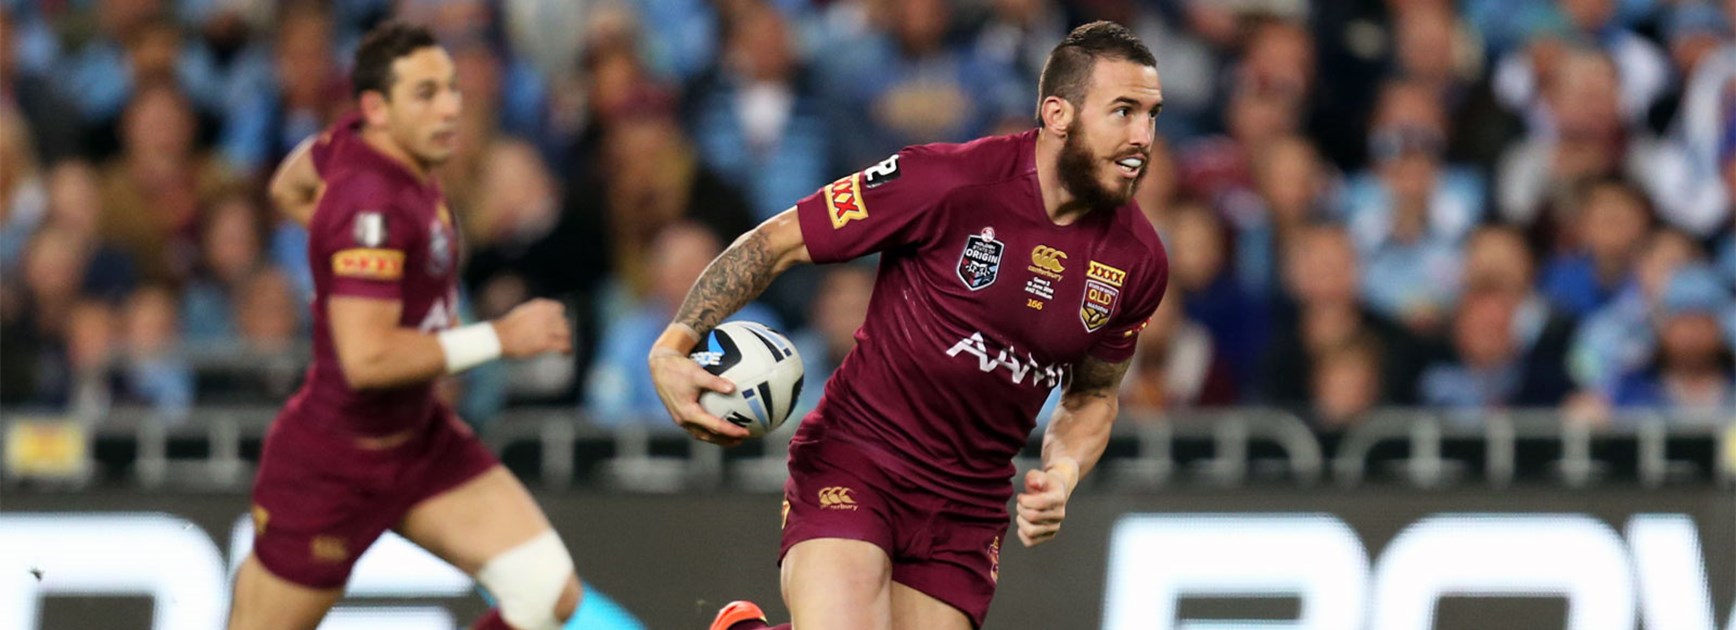 Darius Boyd has been selected by Queensland despite an injury-affected start to the season.